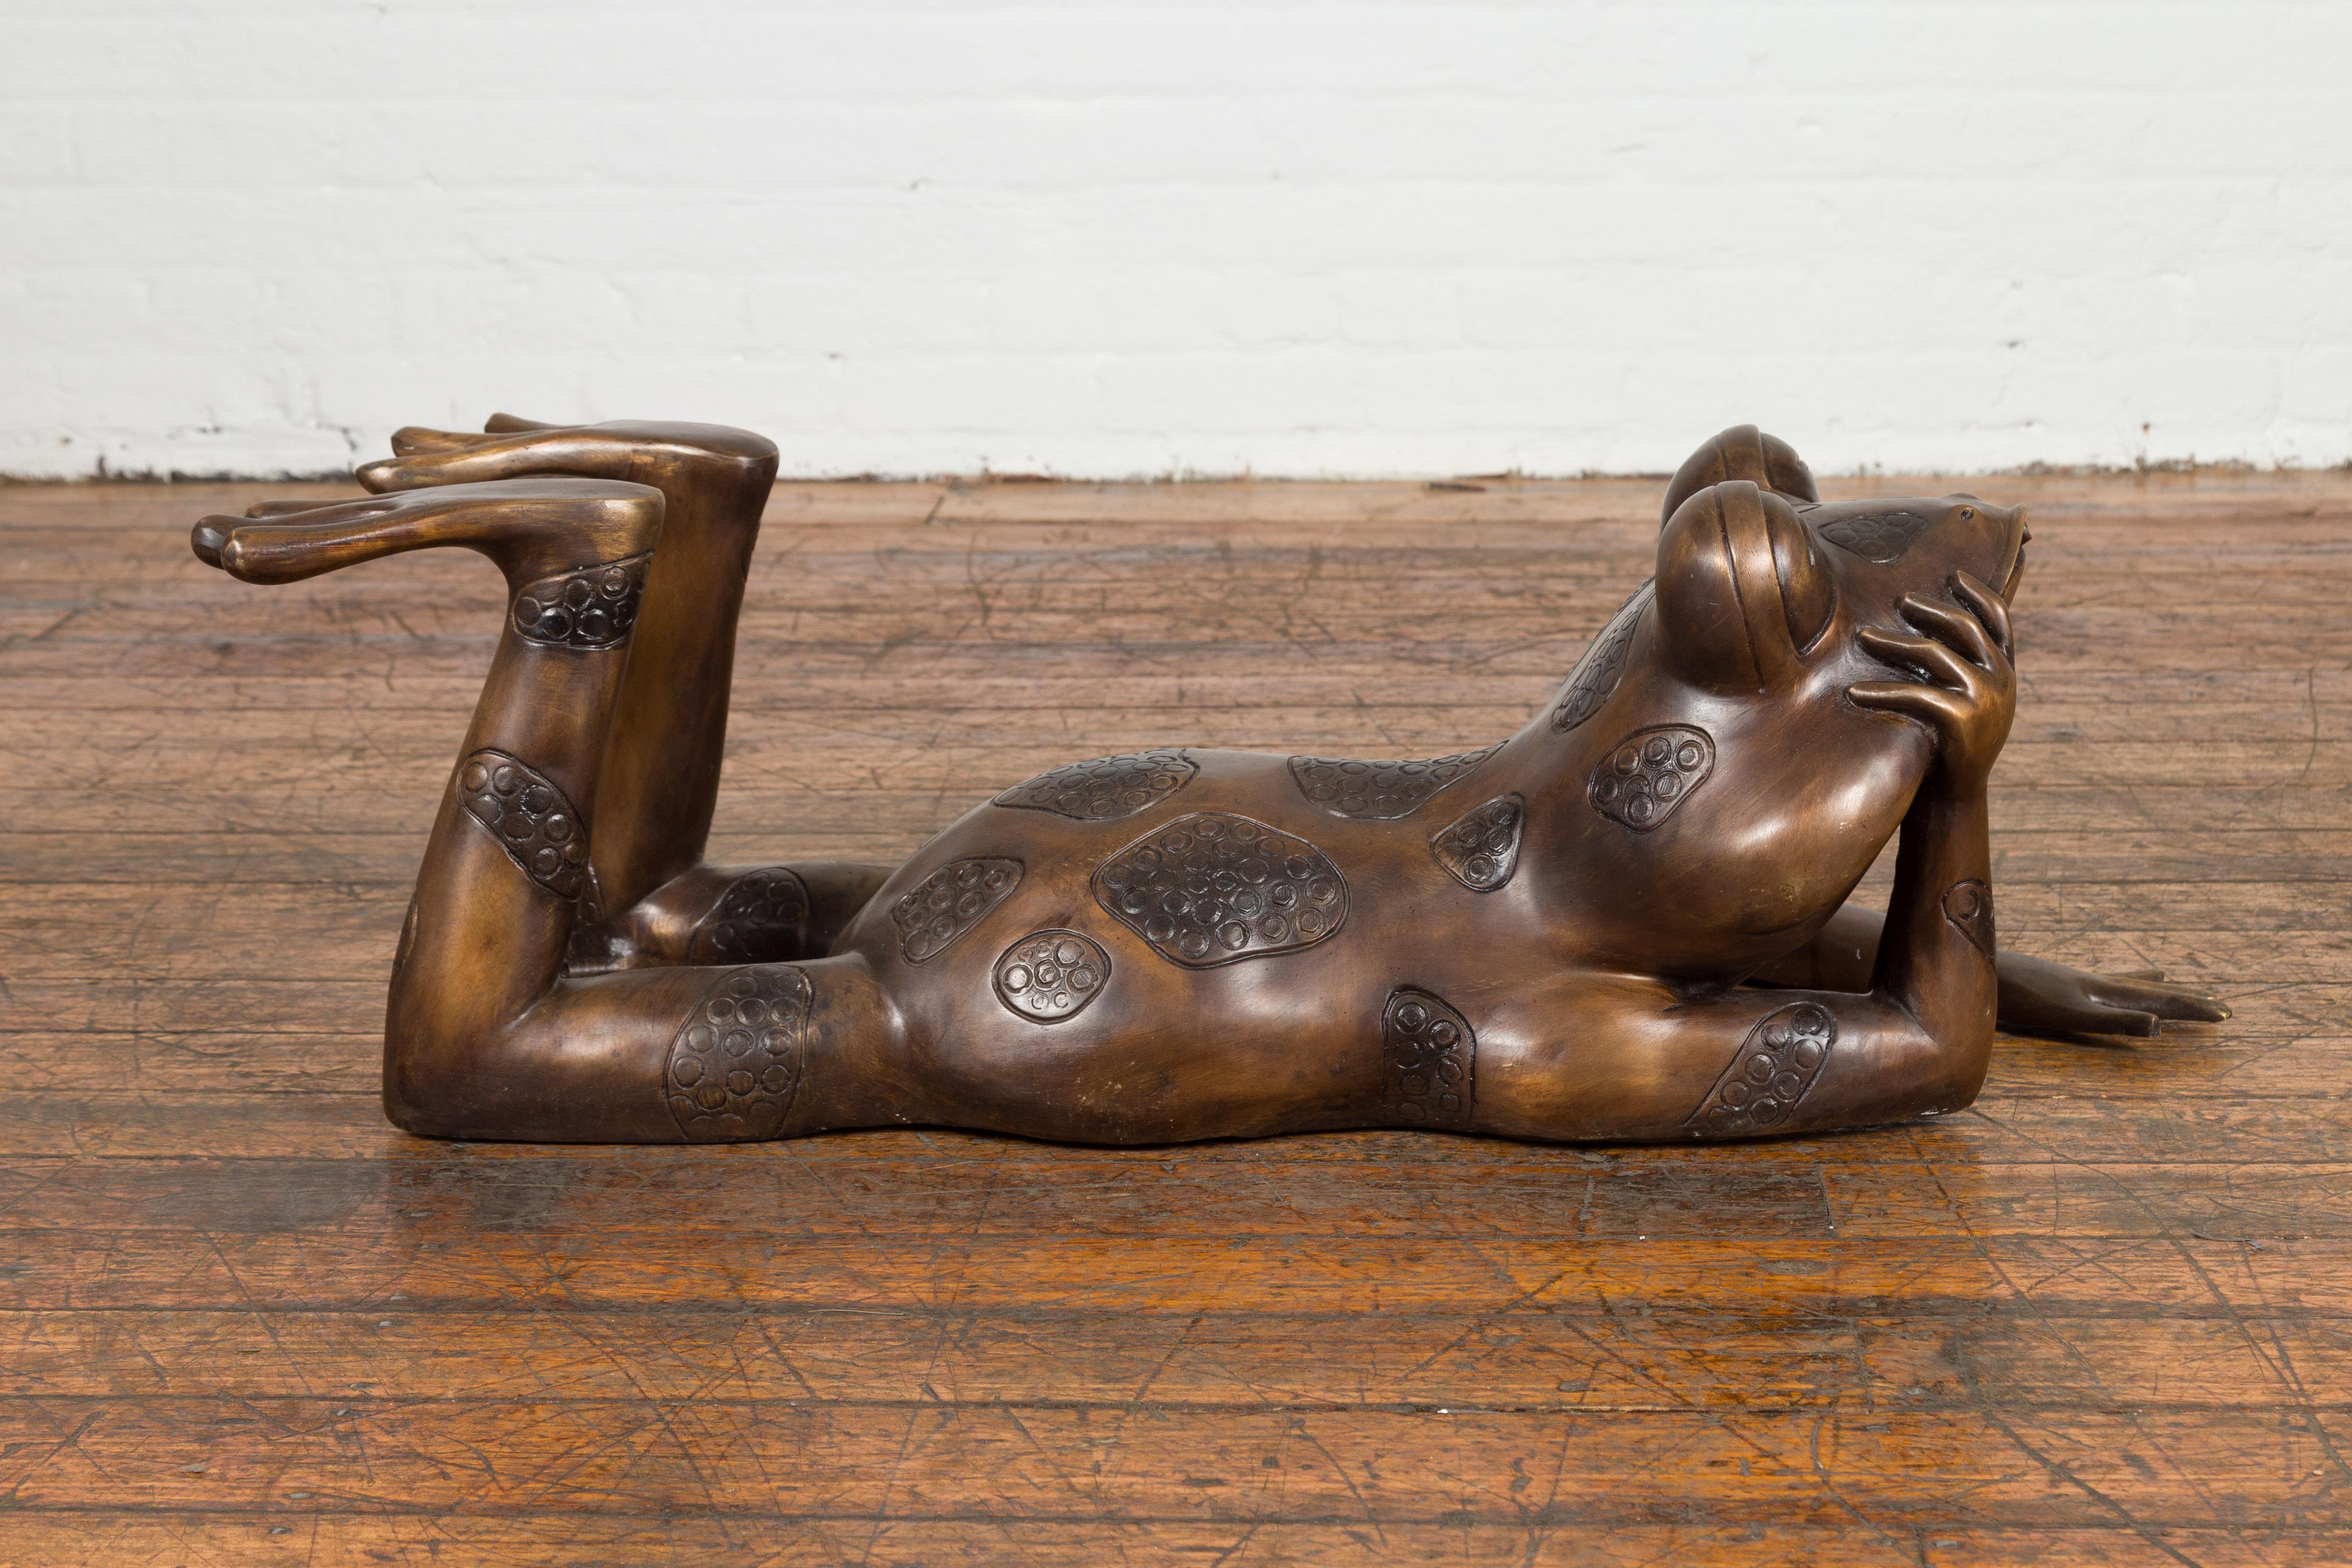 Daydreaming Frog, a lost wax cast bronze sculpture depicting a frog laying on its belly, tubed as a fountain. Presenting the 